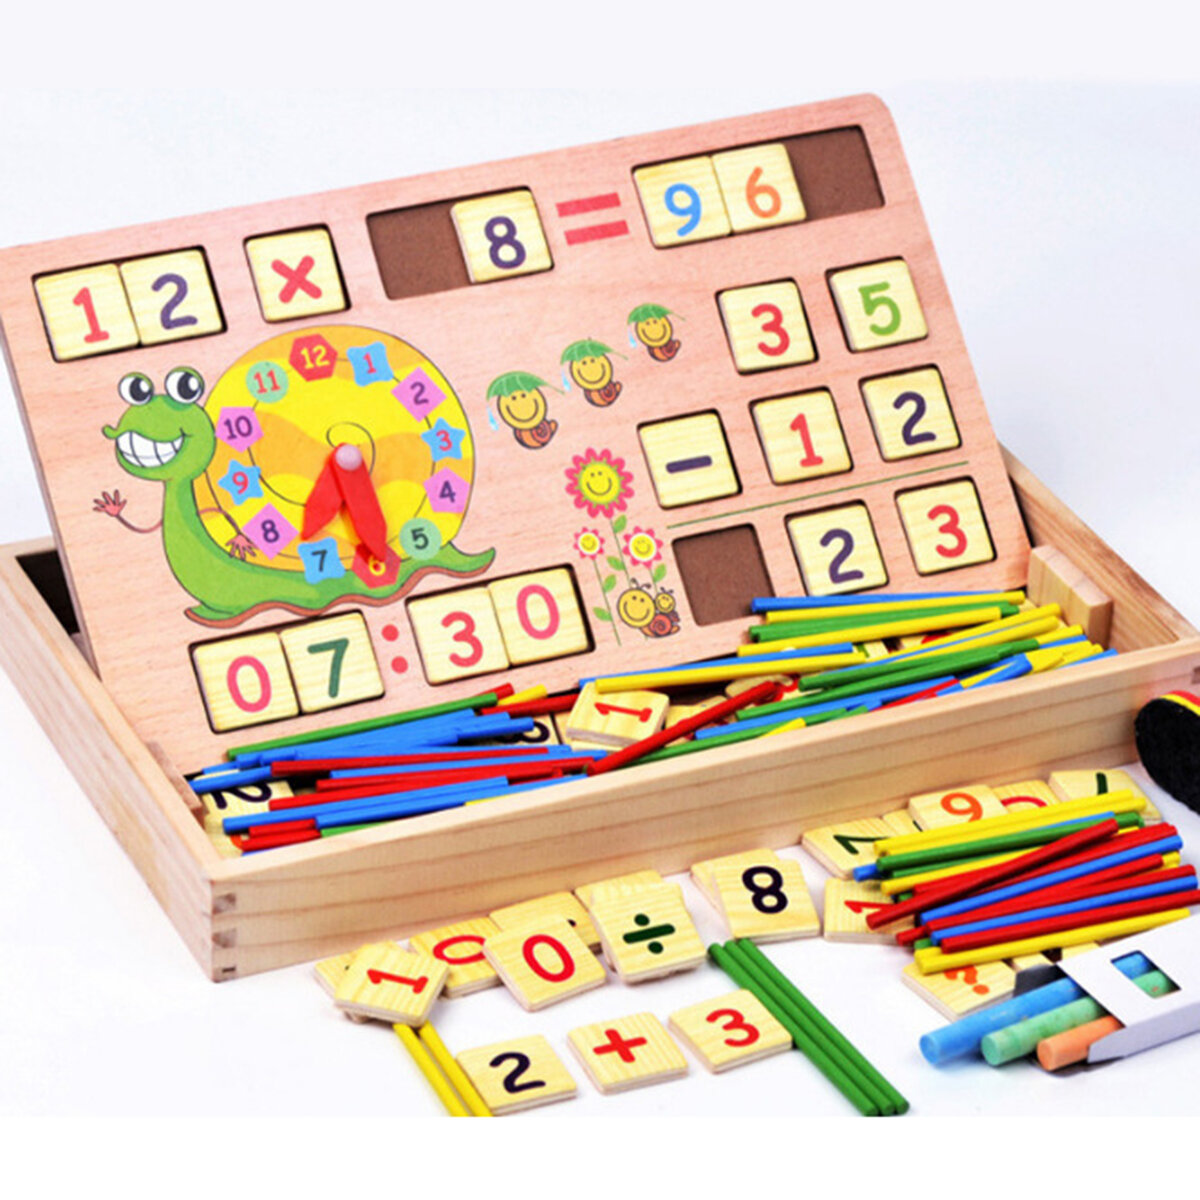 

Wooden Clock Number Mathematics Toys Kids Early Learning Math Educational Toys Gift Blackboard Chalk Arithmetic Board